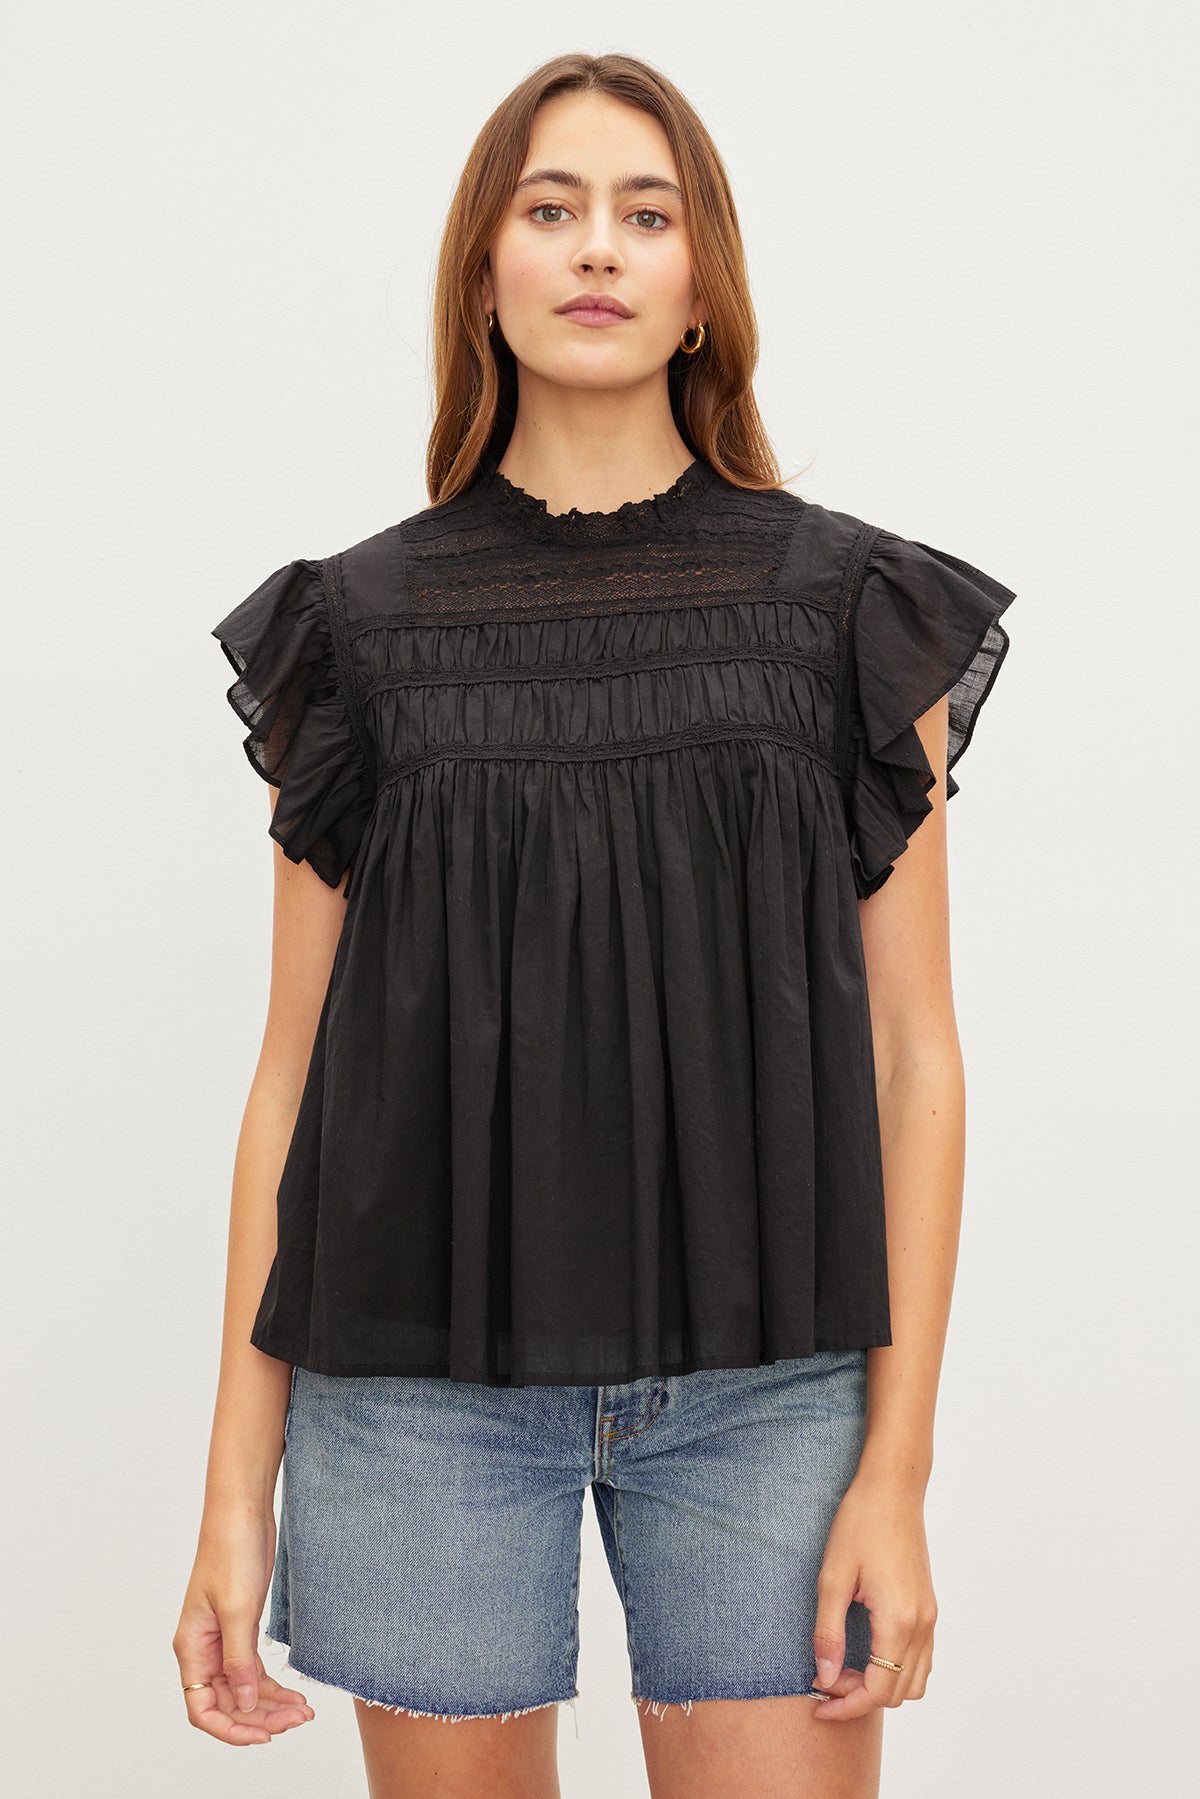   A woman wearing the INESSA COTTON LACE TOP by Velvet by Graham & Spencer, a black top with ruffled sleeves. 